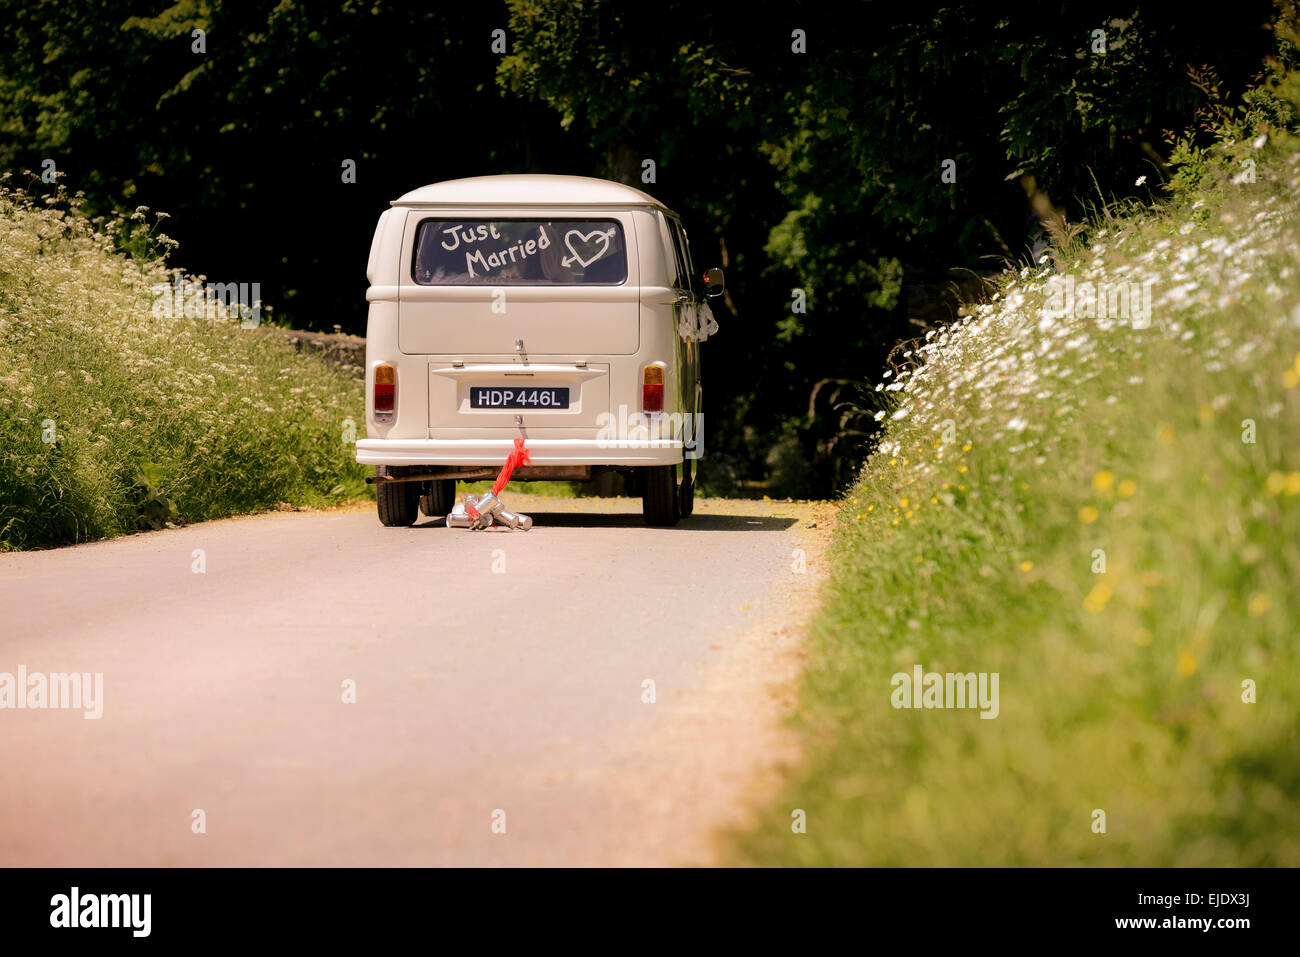 Volkswagen Camper bus with just married in the window being driven away with cans tied to the back bumper. Stock Photo